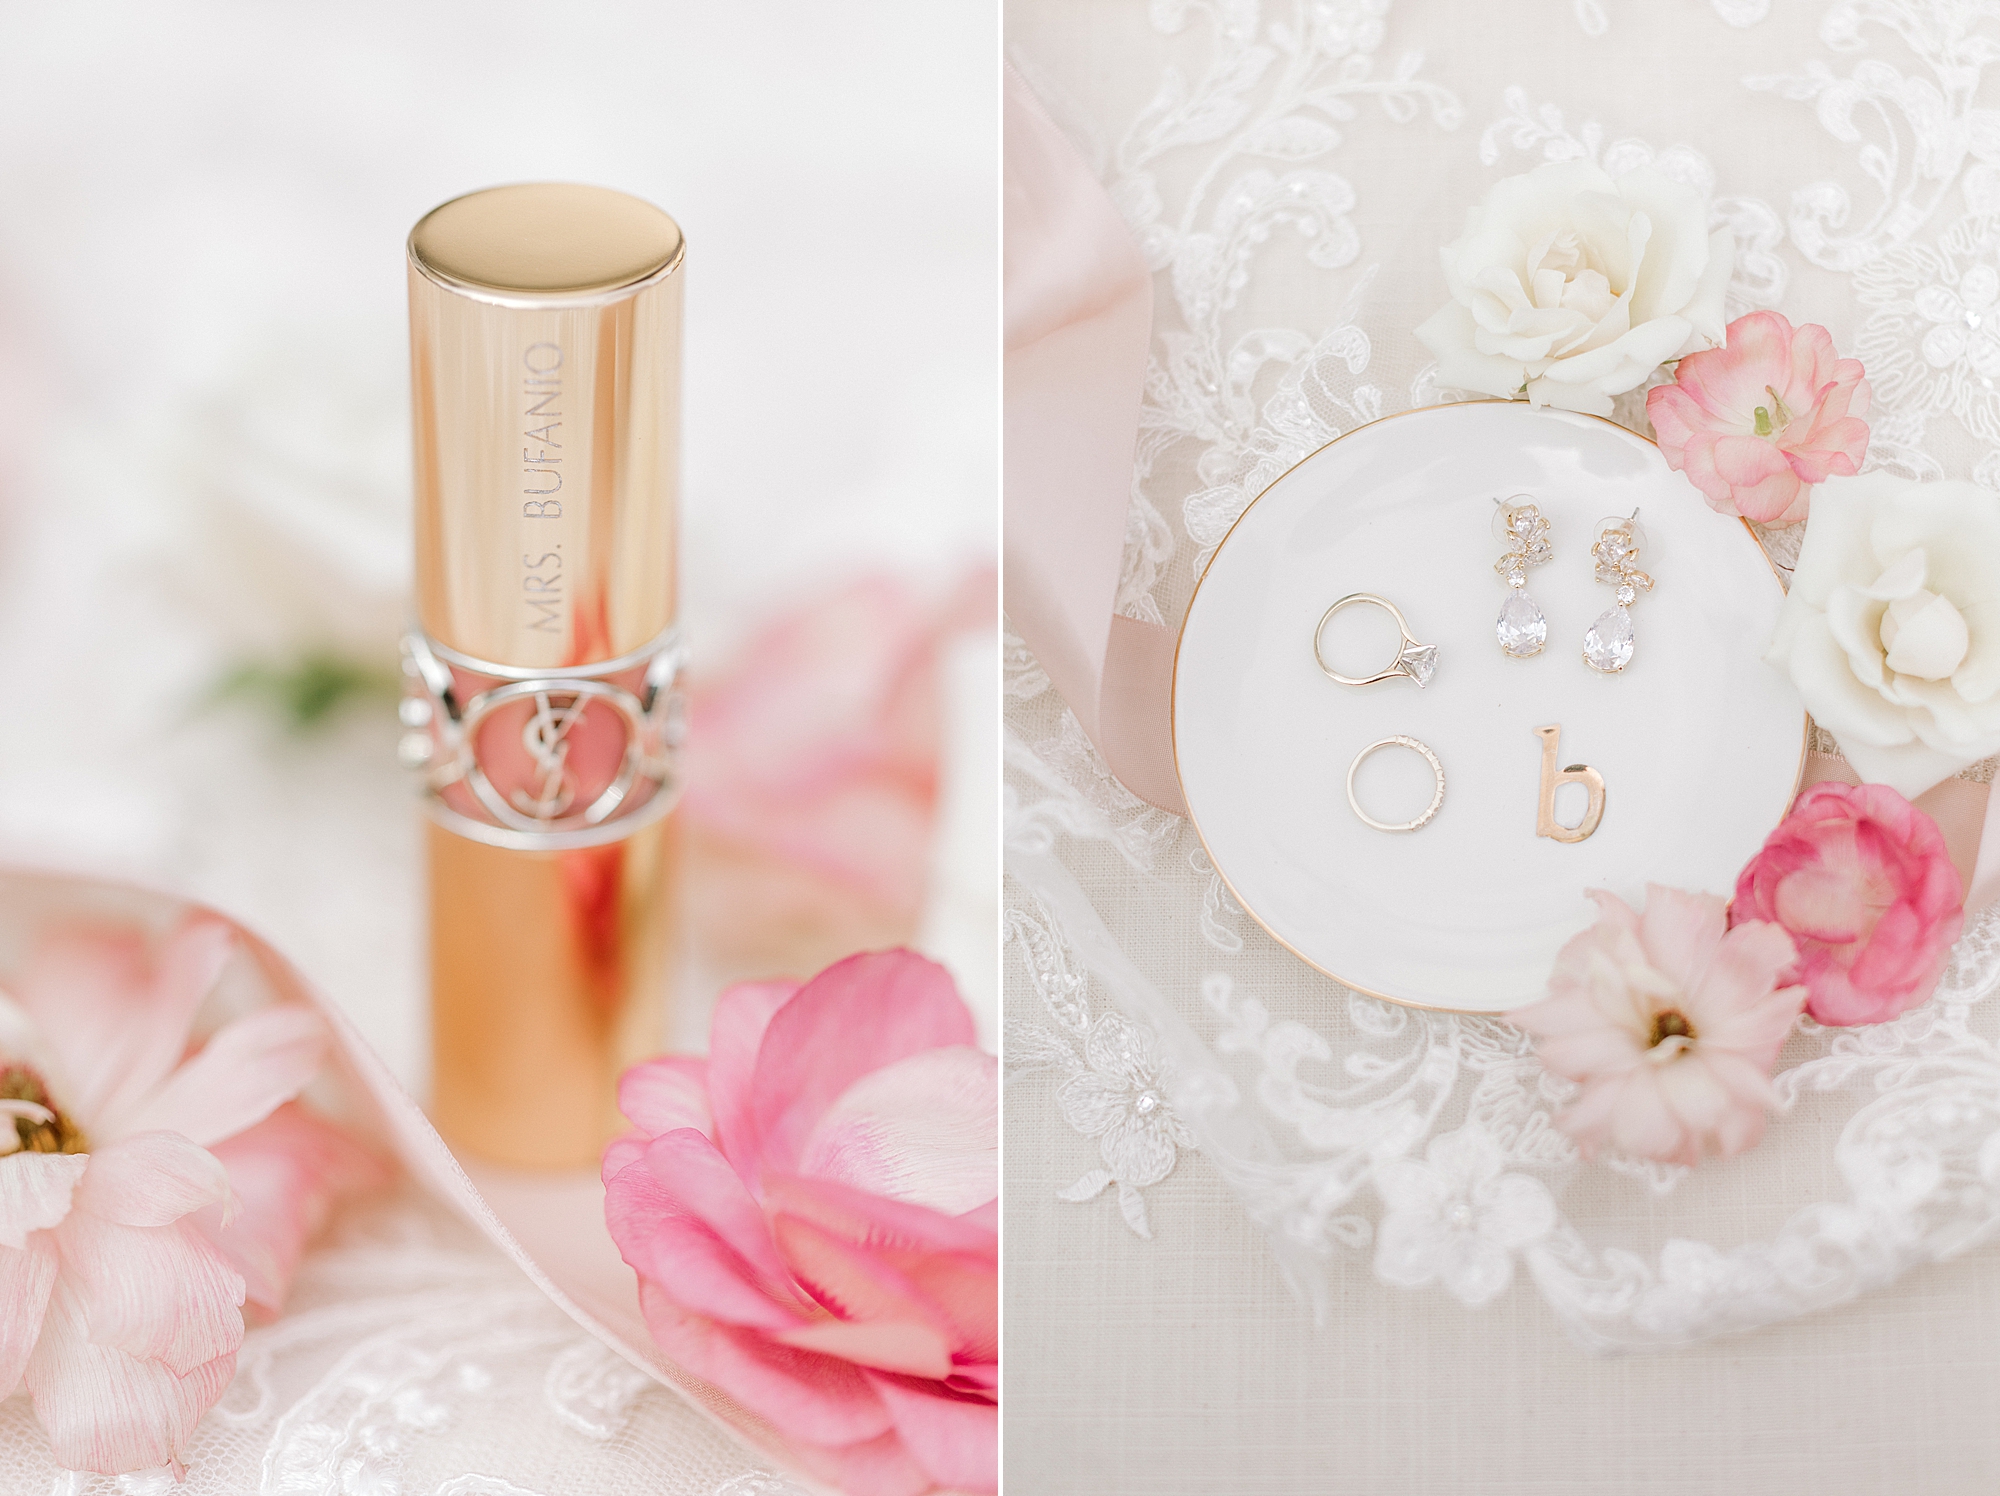 bride's perfume and jewelry on monogramed tray